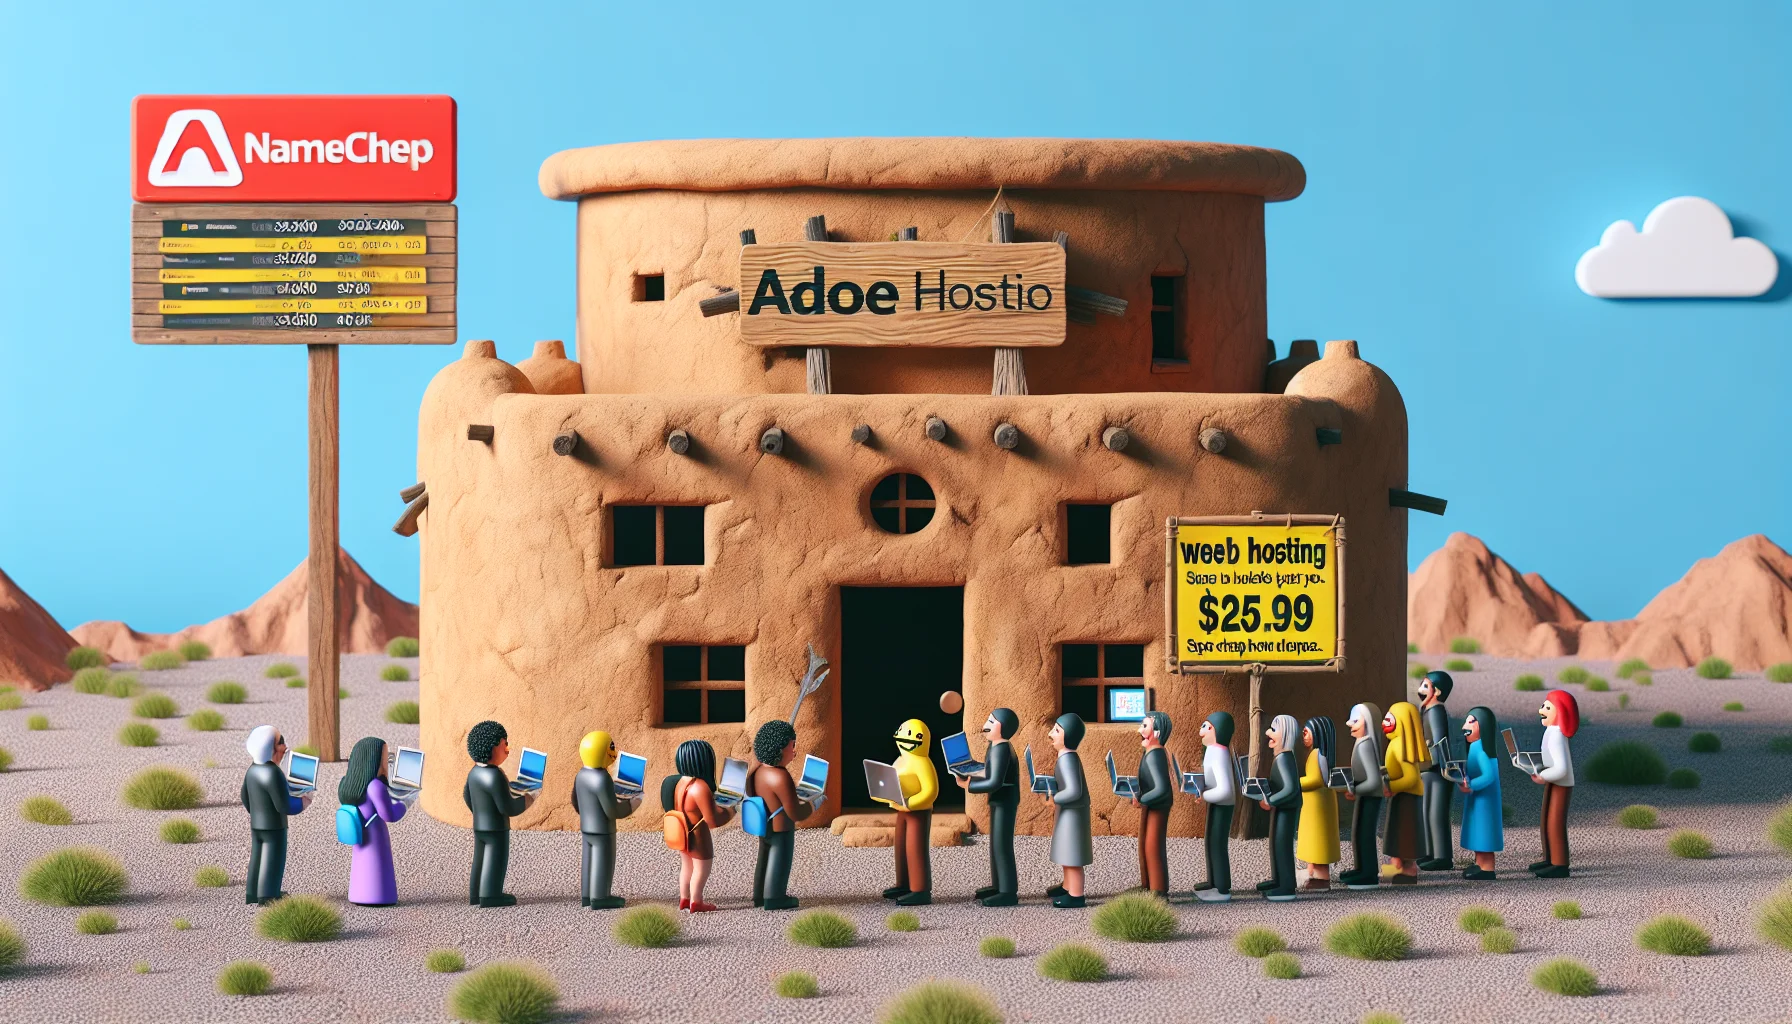 Create a humorous and realistic scenario portraying the concept of web hosting. In this setting, an old-style building has been made from adobe, serving as a metaphor for Adobe Portfolio. Near it, there's a sign displaying a similar logo to that of Namecheap, but not identical, showing special discounts. There's a line of various excited people of different genders and descents waiting to get inside, holding their laptops, eager to take advantage of the cheap hosting deals. The scene invites curiosity and hilarity, highlighting the eccentric nature of the always-evolving digital world.